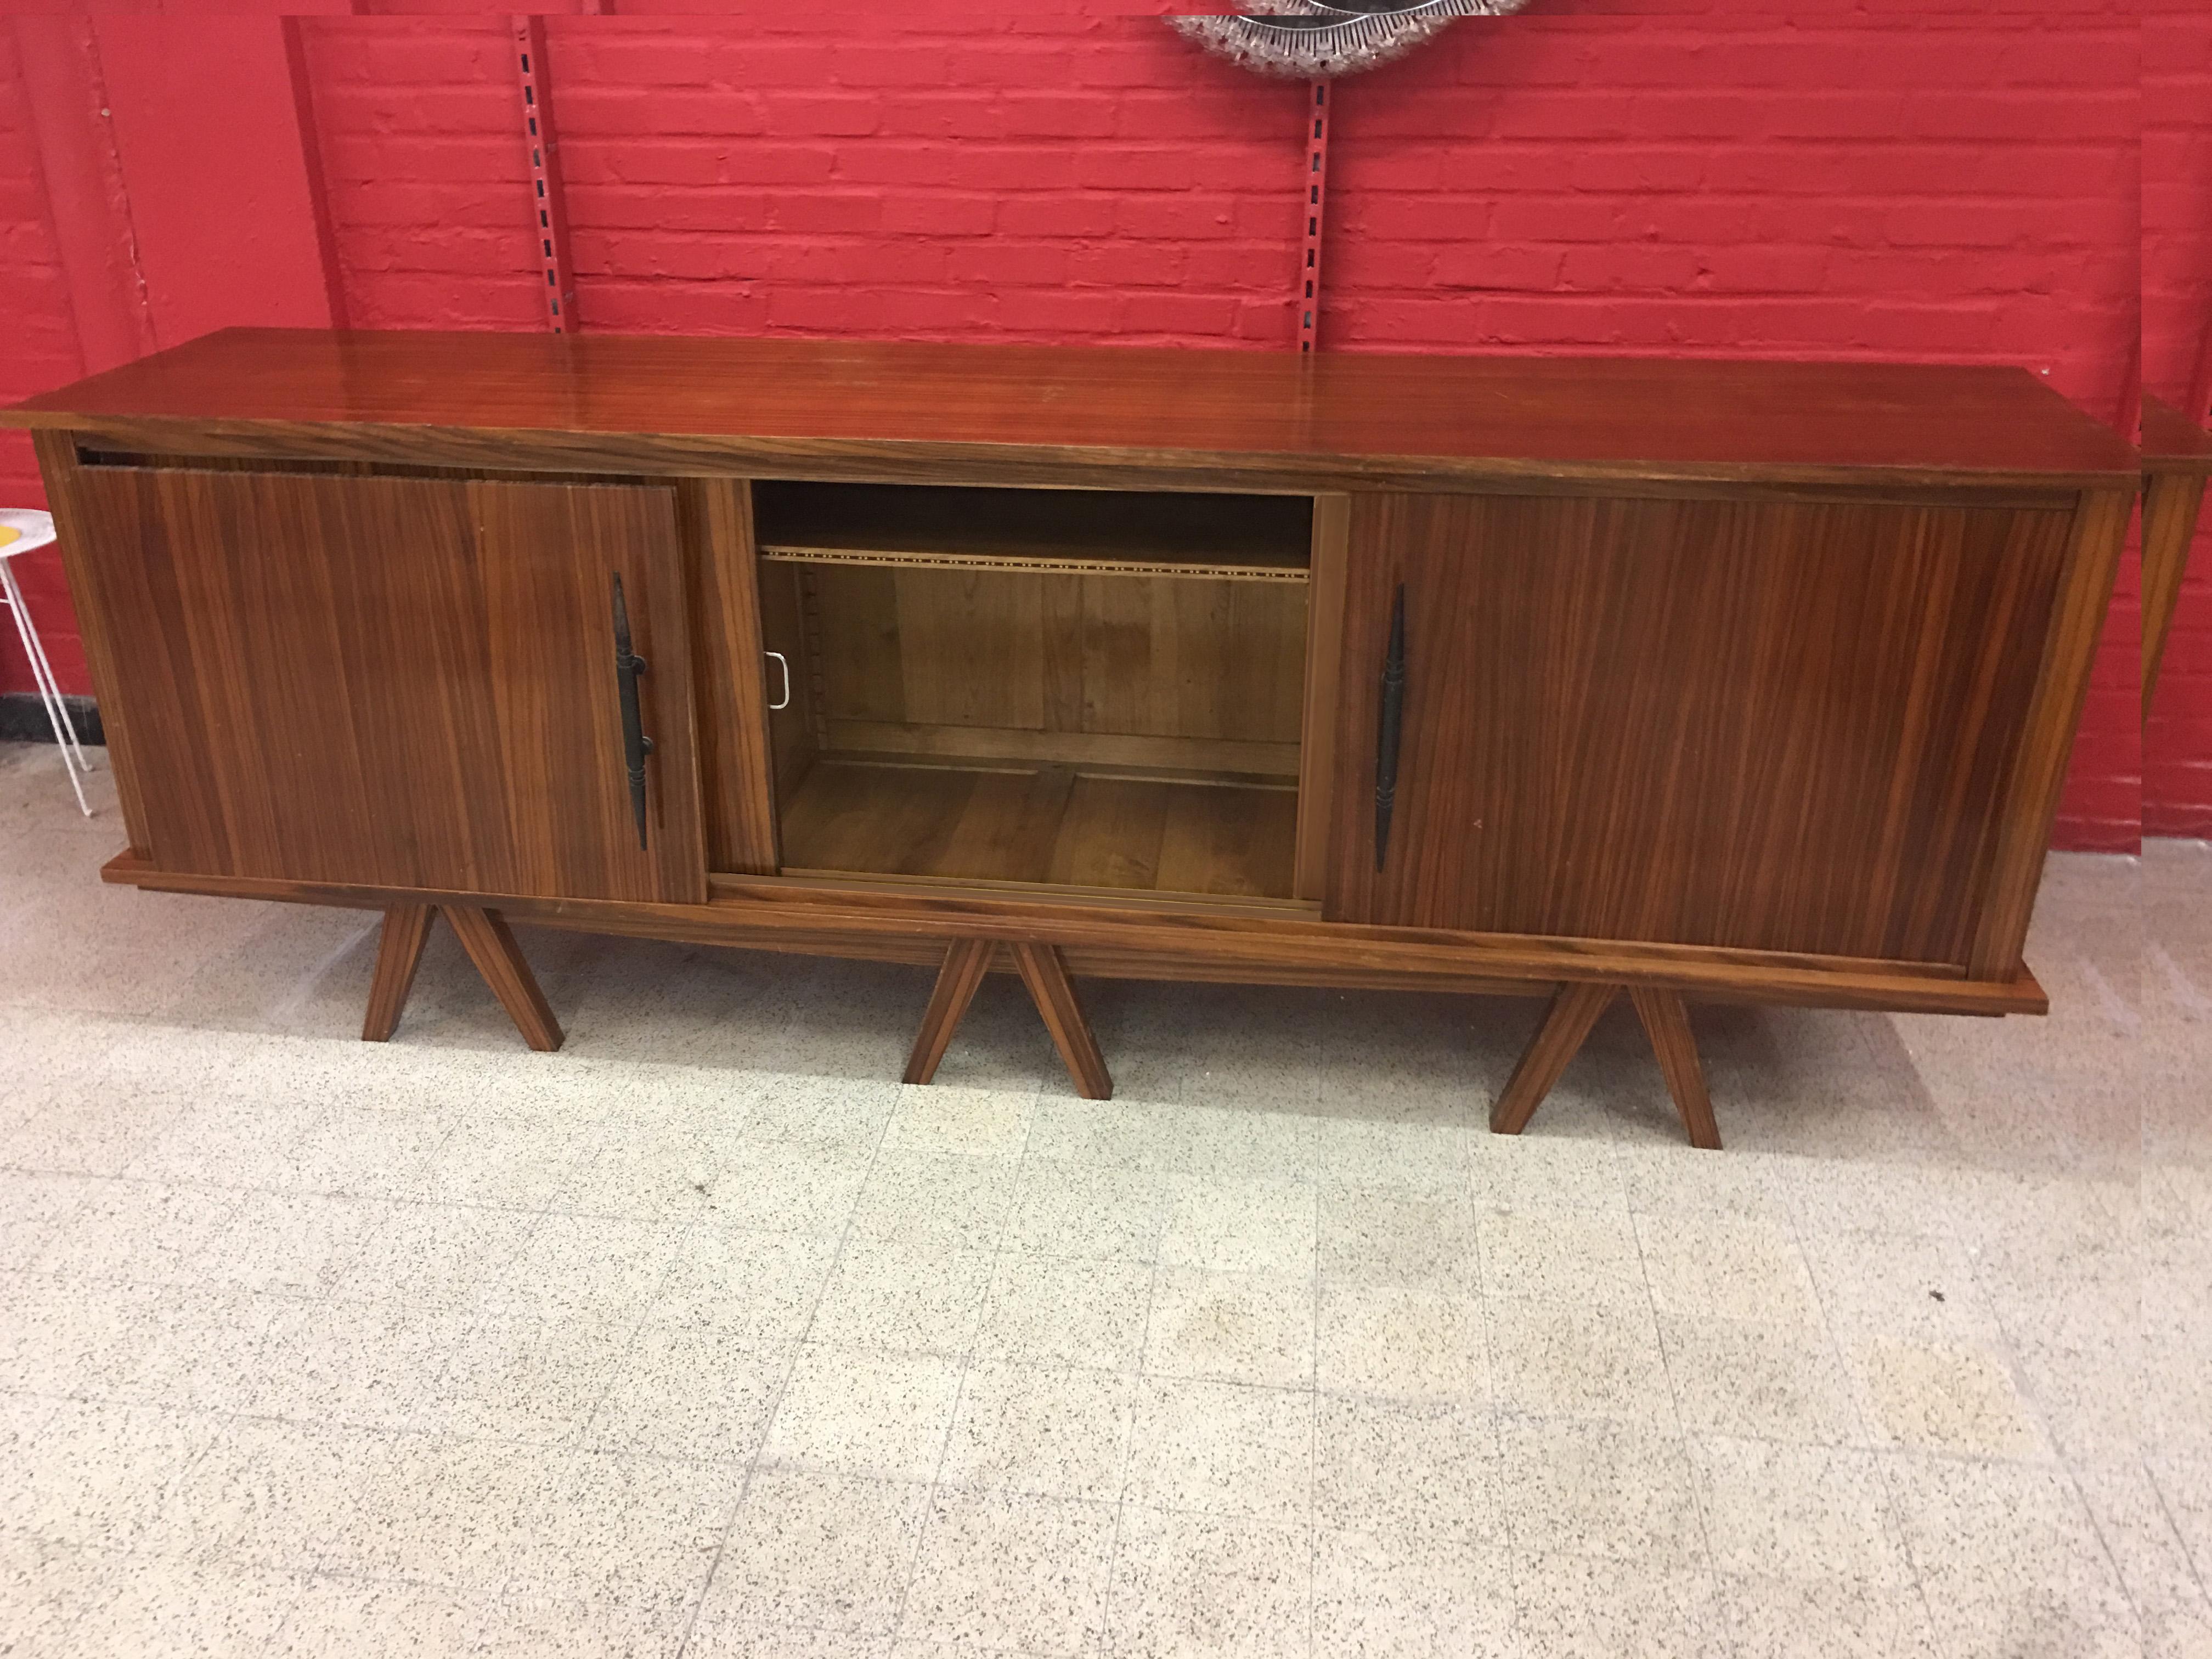  Zebra Wood and wrought iron brutalist Sideboard circa 1950 For Sale 2